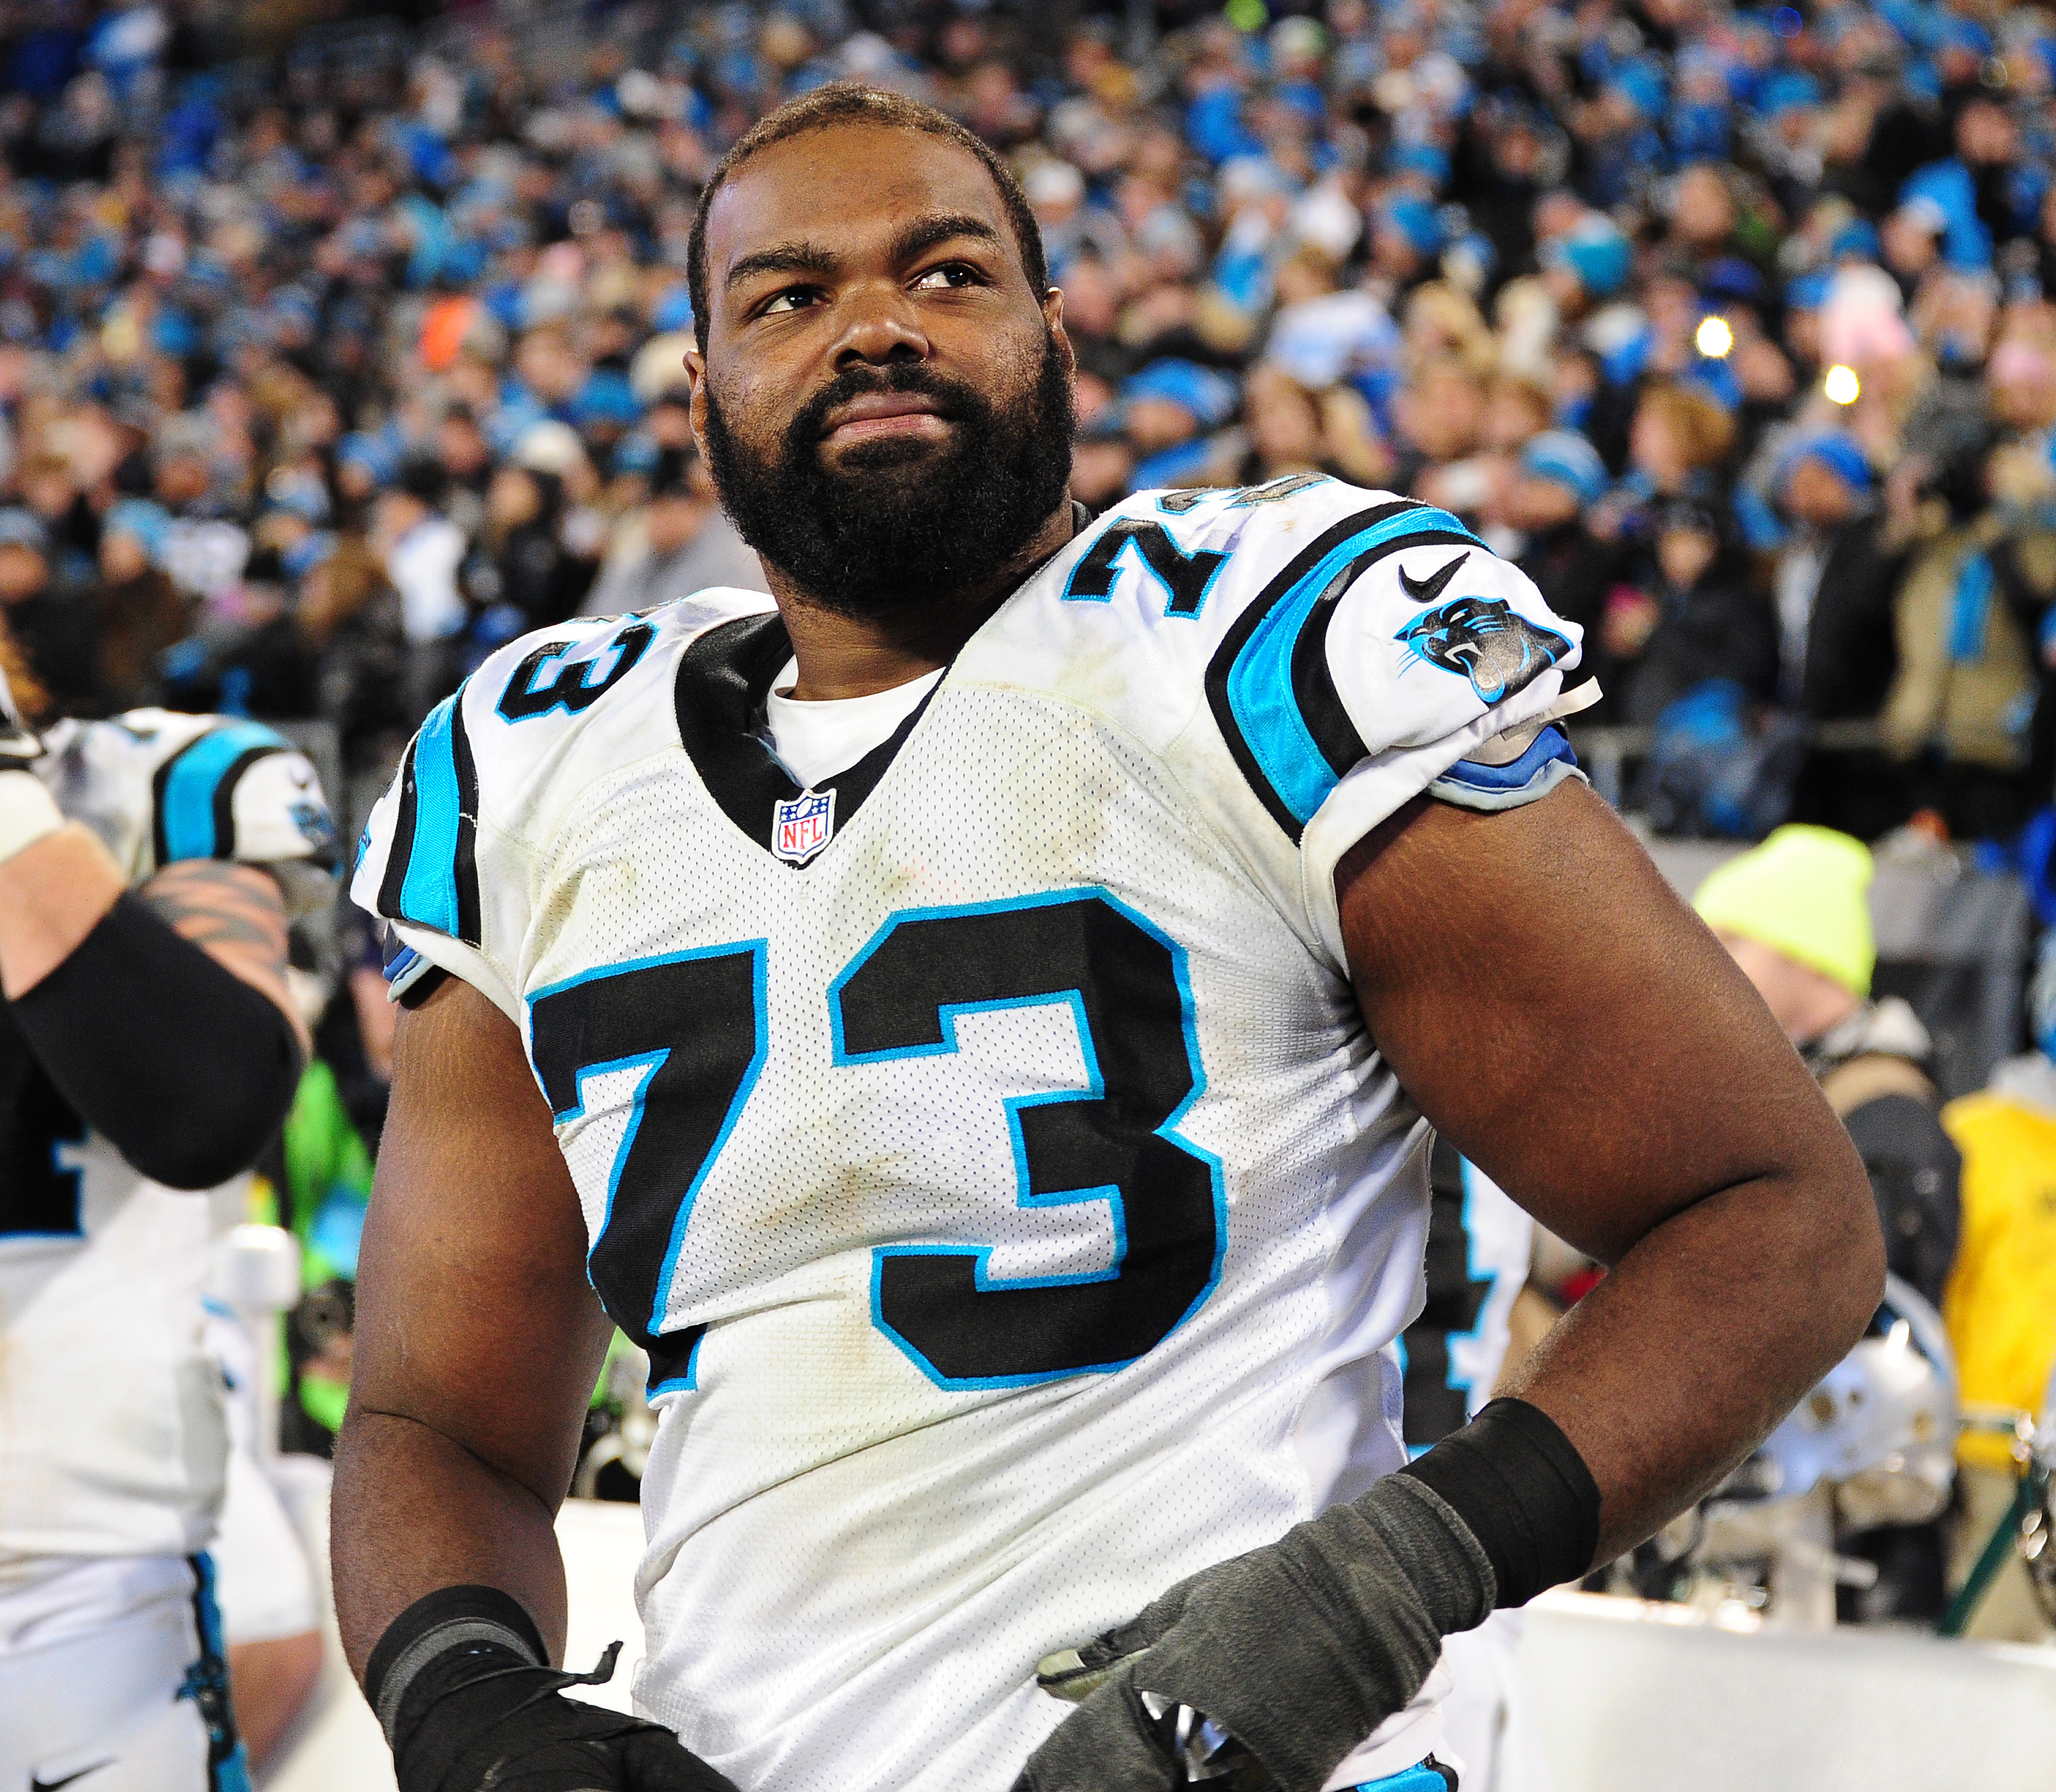 Michael Oher of the Carolina Panthers watches play against the Arizona Cardinals during the NFC Championship Game on January 24, 2016, in Charlotte, North Carolina. | Source: Getty Images